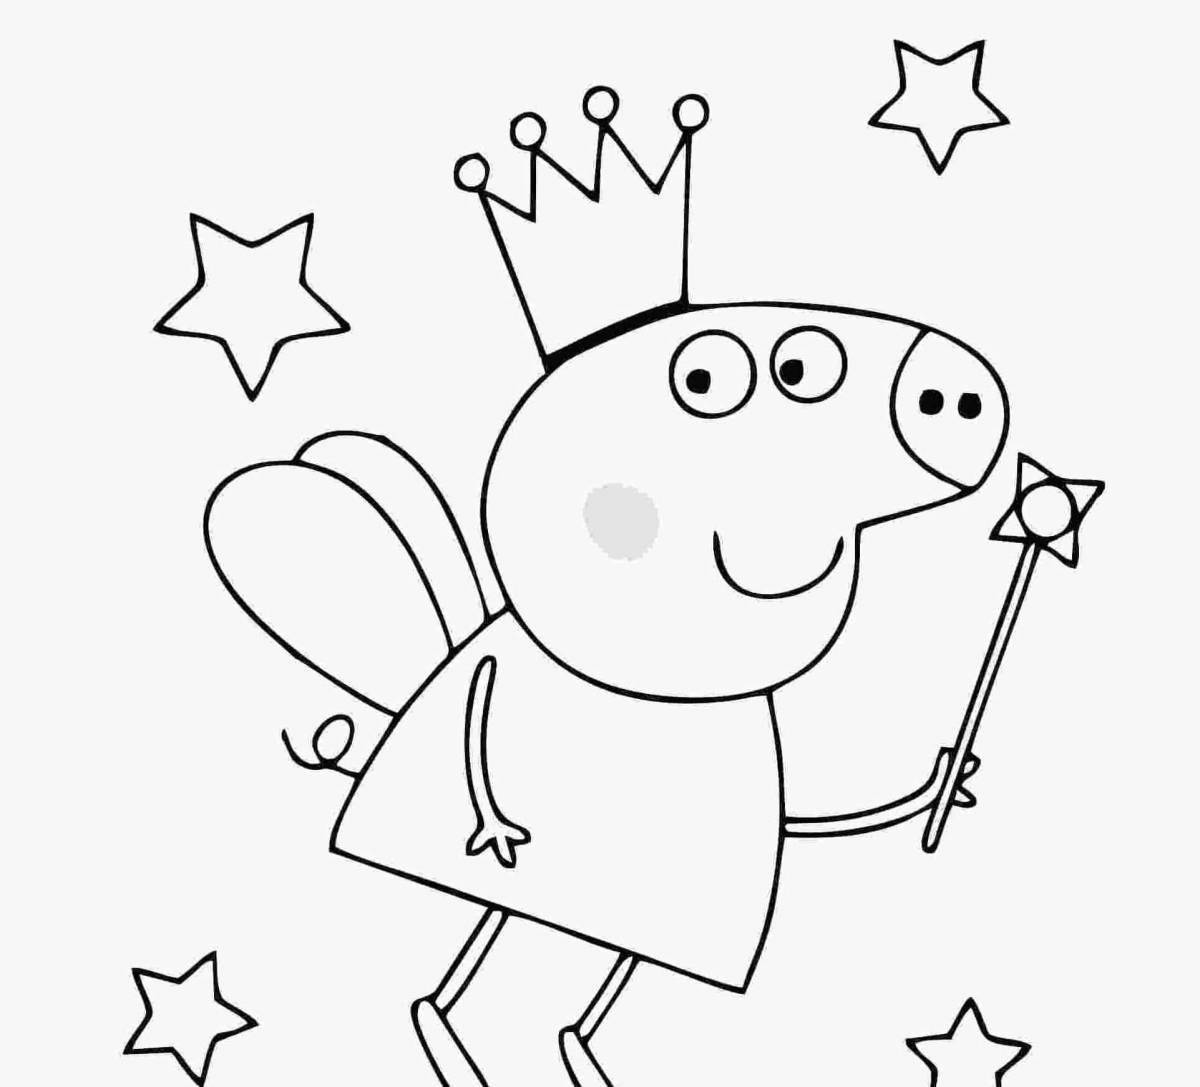 Coloring page sparkling frog peppa pig